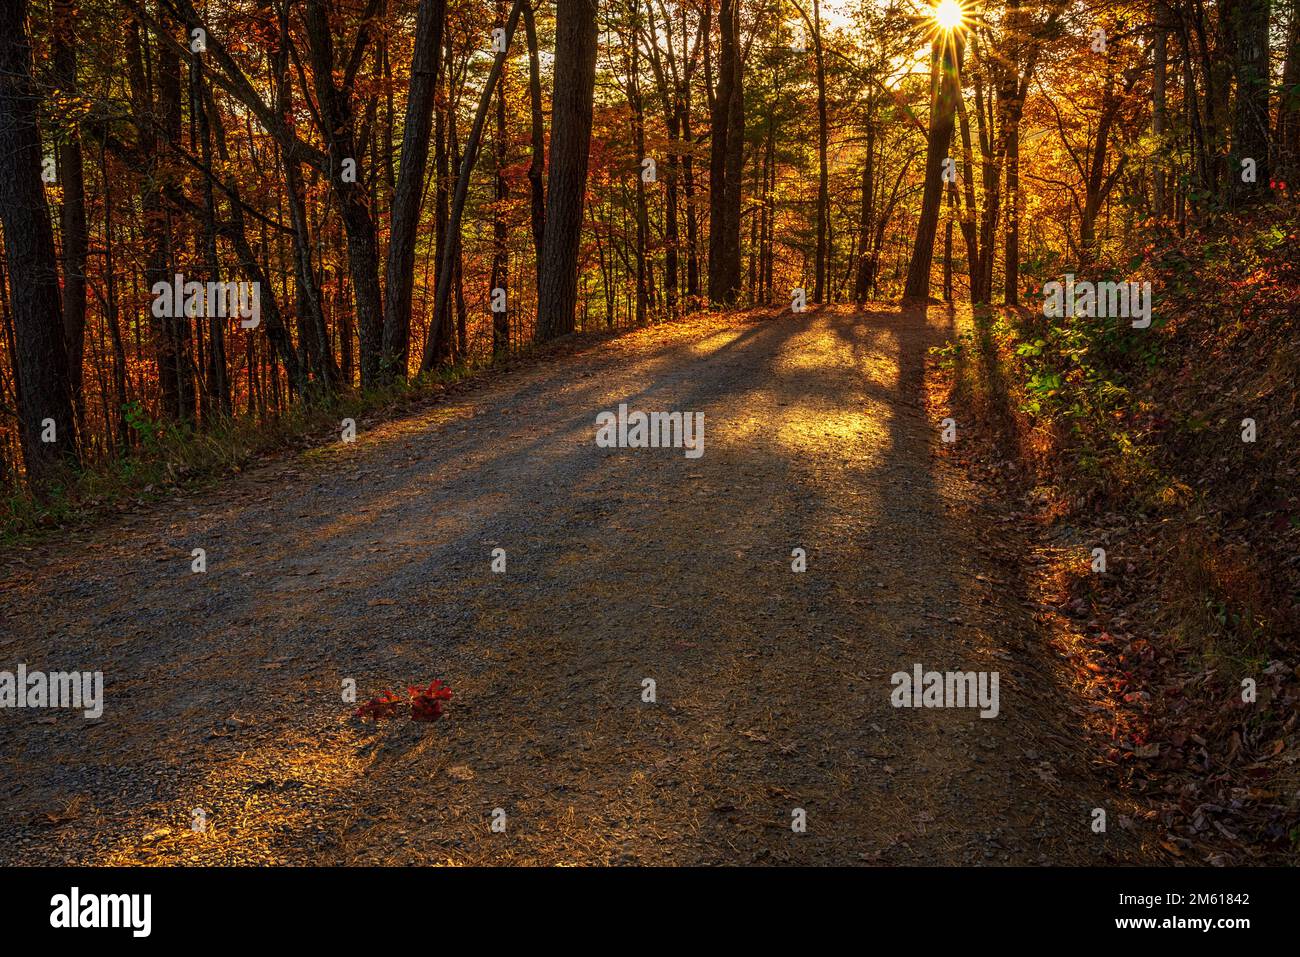 Sun shining through autumn forest in Great Smoky Mountain National Park in Tennessee Stock Photo